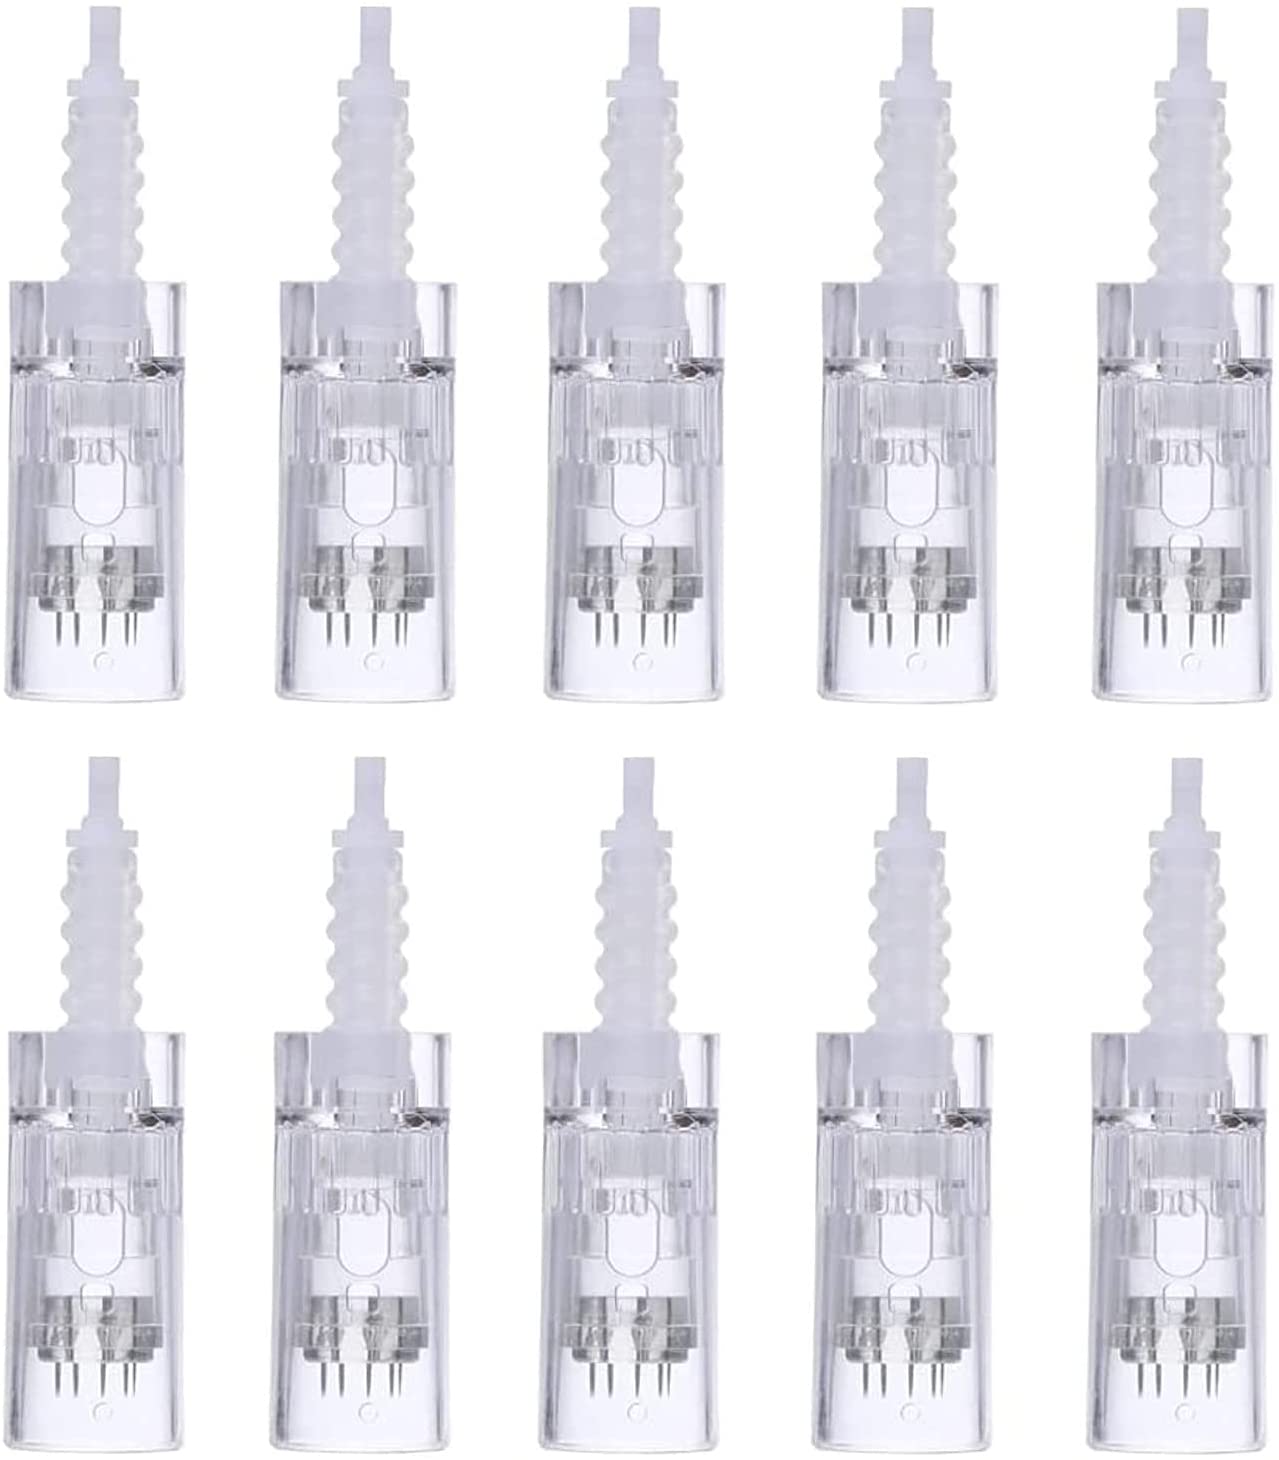 P-Beauty Cosmetic Accessories 42 Pin Needle Cartridges Replacement Needle Cartridges for Car Derma Electric Pen Microneedling Bayonet Closure for Dermapen Devices with Bayonet Port Pack of 10 (42-Pins)